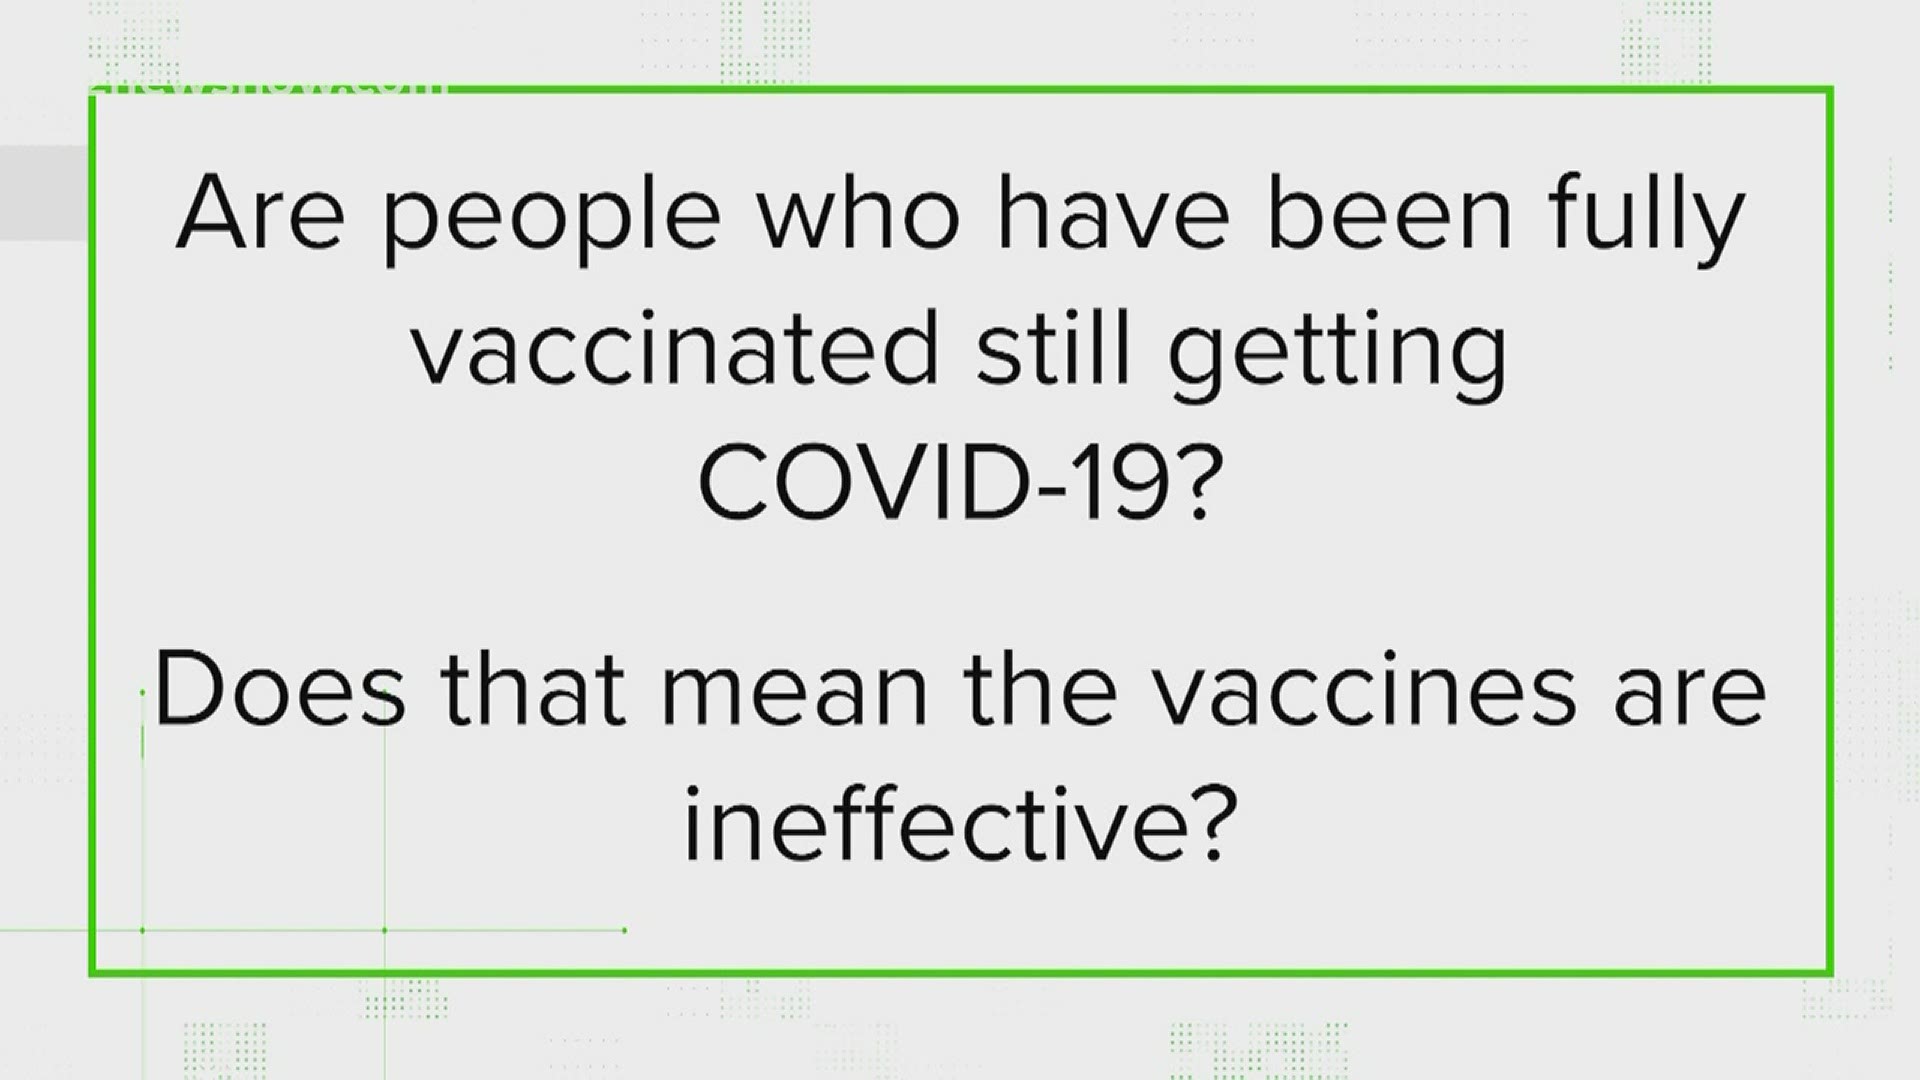 Although the vaccines are highly effective and lower the chances of catching the virus, the vaccines are not perfect.